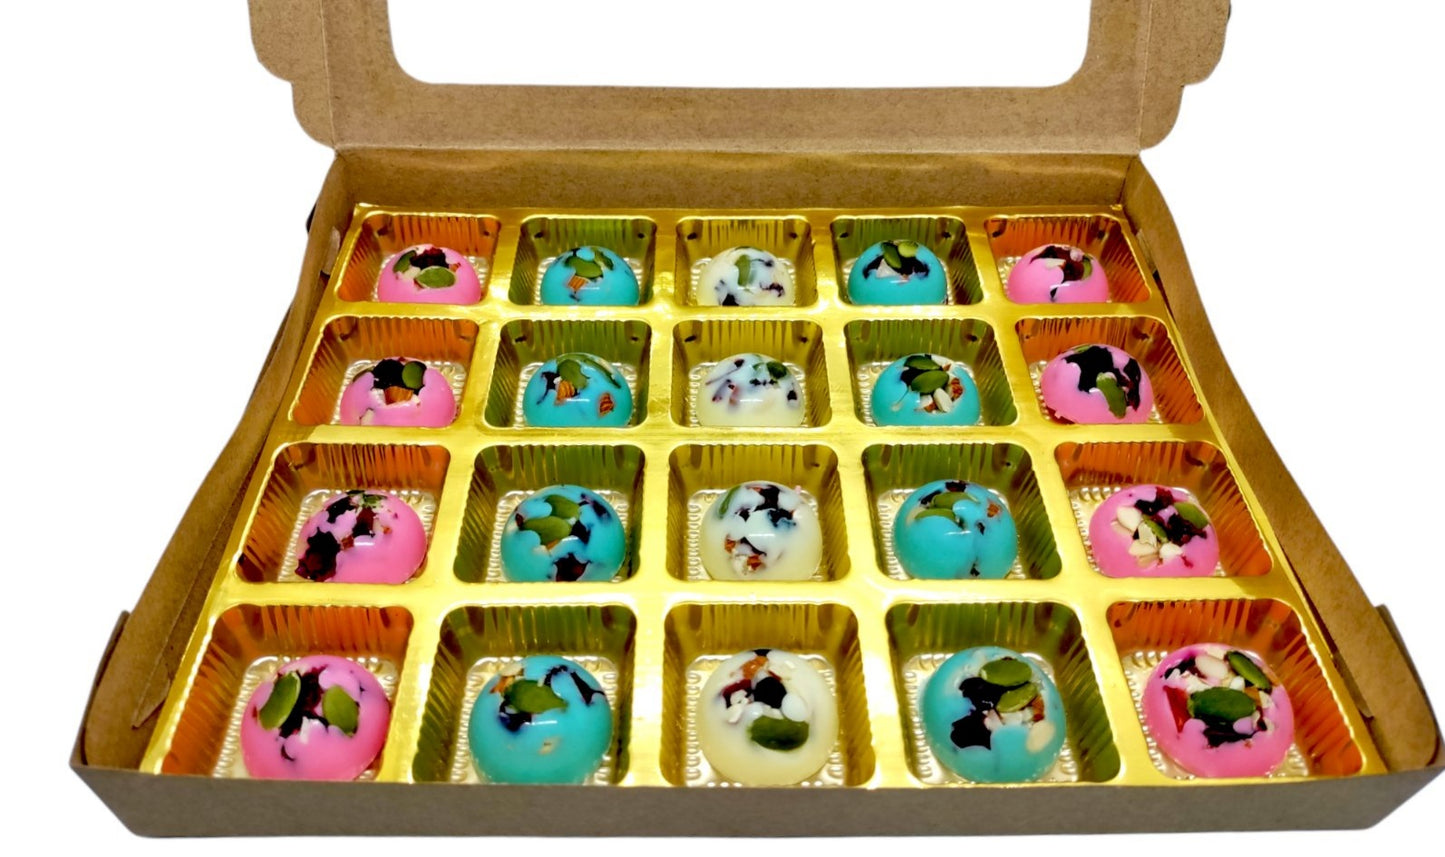 26 Bakes Colorful Mix Chocolates with Dry-Fruits (20 Pcs)